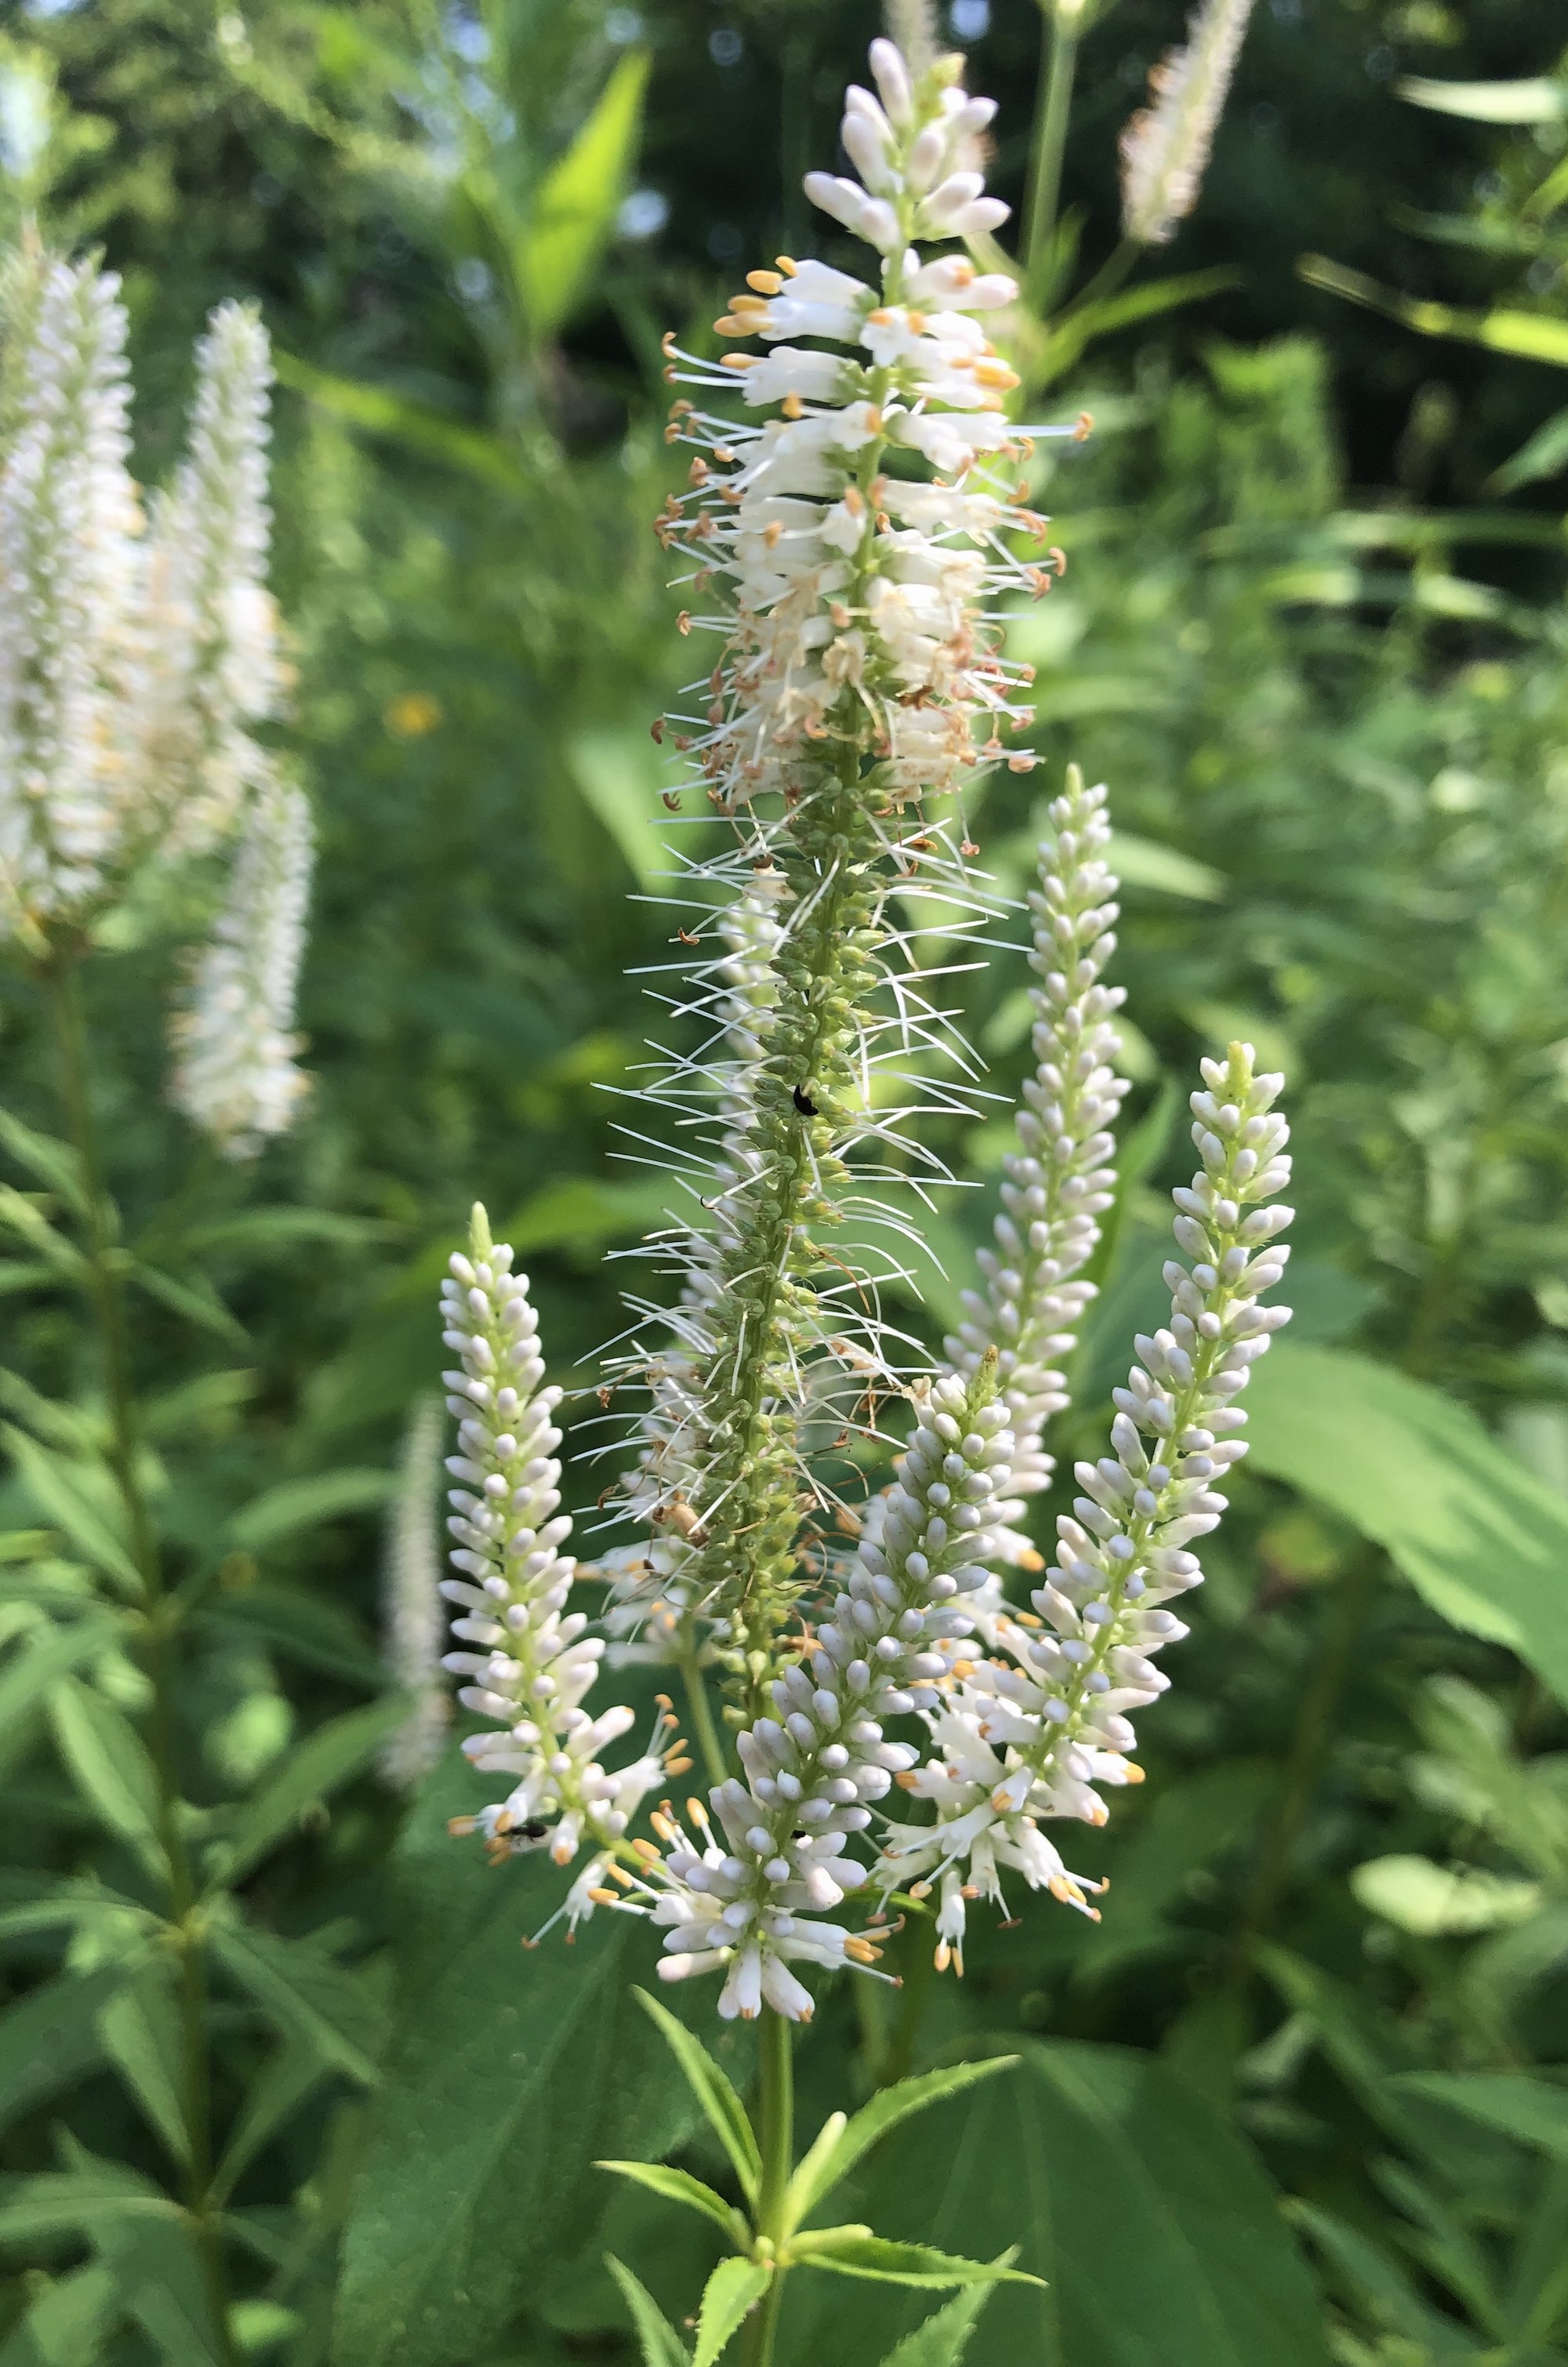 Culver's Root in Oak Savanna in Madison, Wisconsin on July 23, 2019.